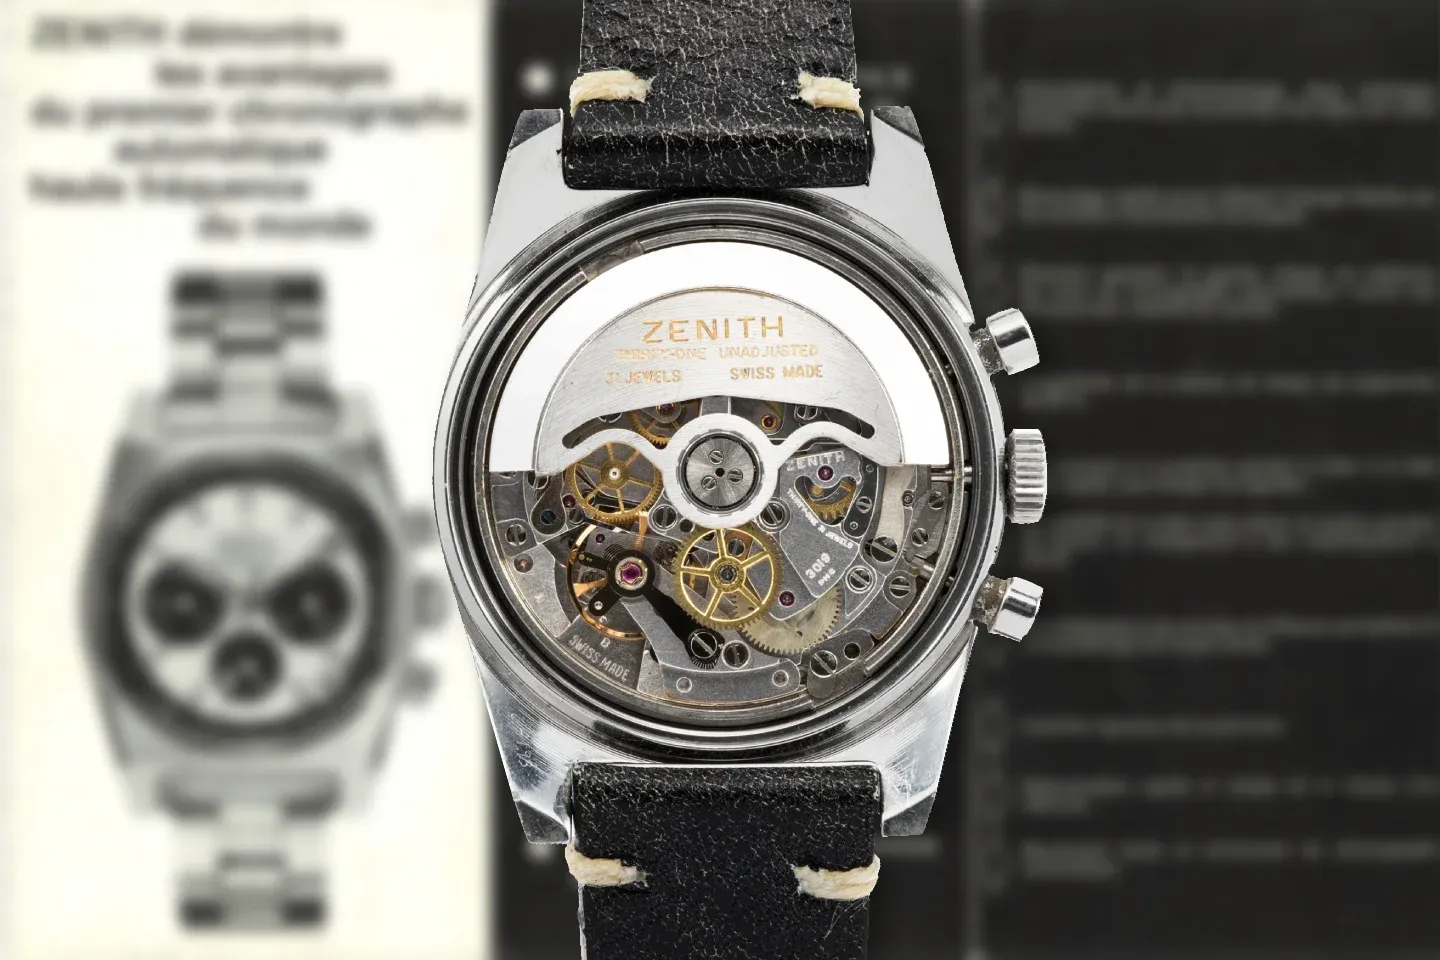 Zenith announced its 'El Primero' movement in January of 1969 and market availability was as late as in October